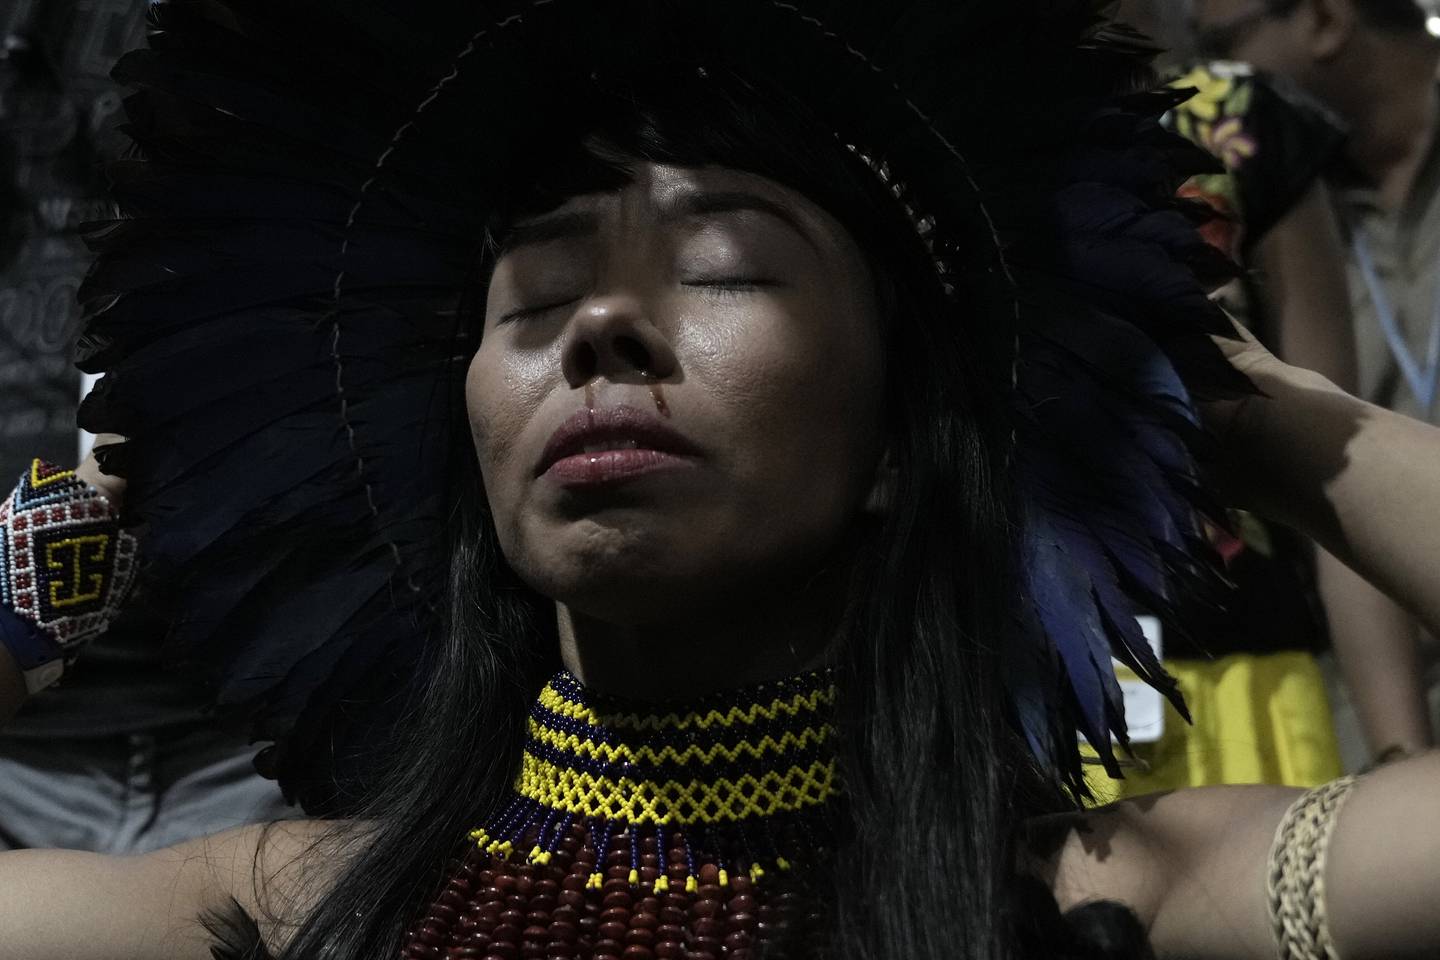 A member of the Sapara community in the Amazon region of Ecuador, one of the developing countries that a Cop27 draft document seeks to assist. AP